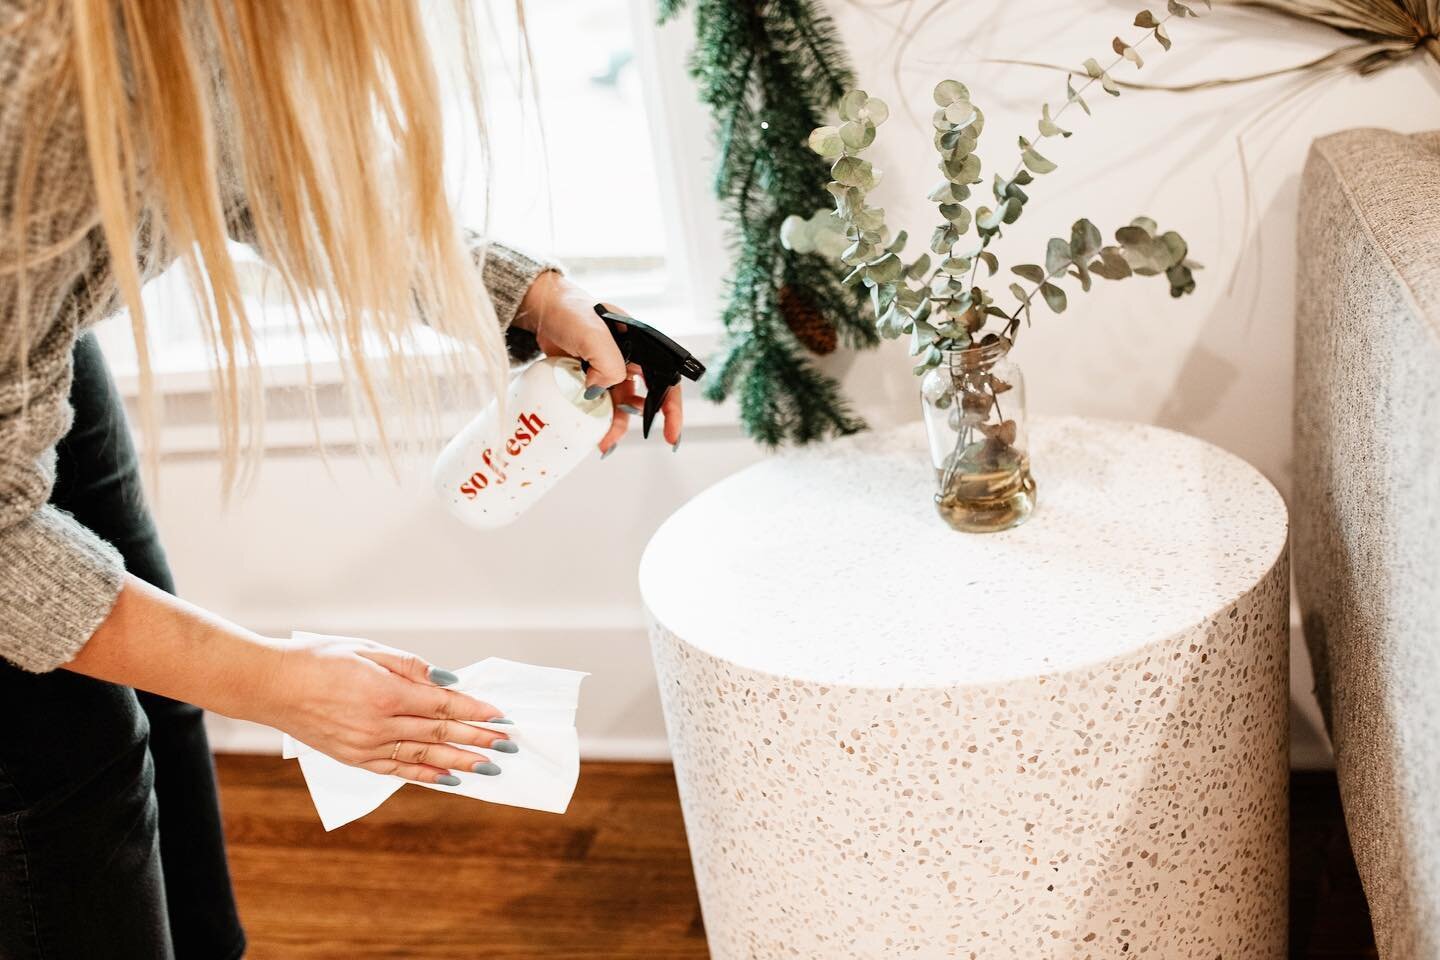 🌼SPRING CLEANING🌼⁣
⁣
Are you looking to learn how to detox your home of toxins and ⁣harsh chemicals and switch to a more natural cleaning product?⁣
⁣
Join us TOMORROW, March 20th at 11AM as Dr. Lacey and Blair Estes teach you how to ditch + switch 